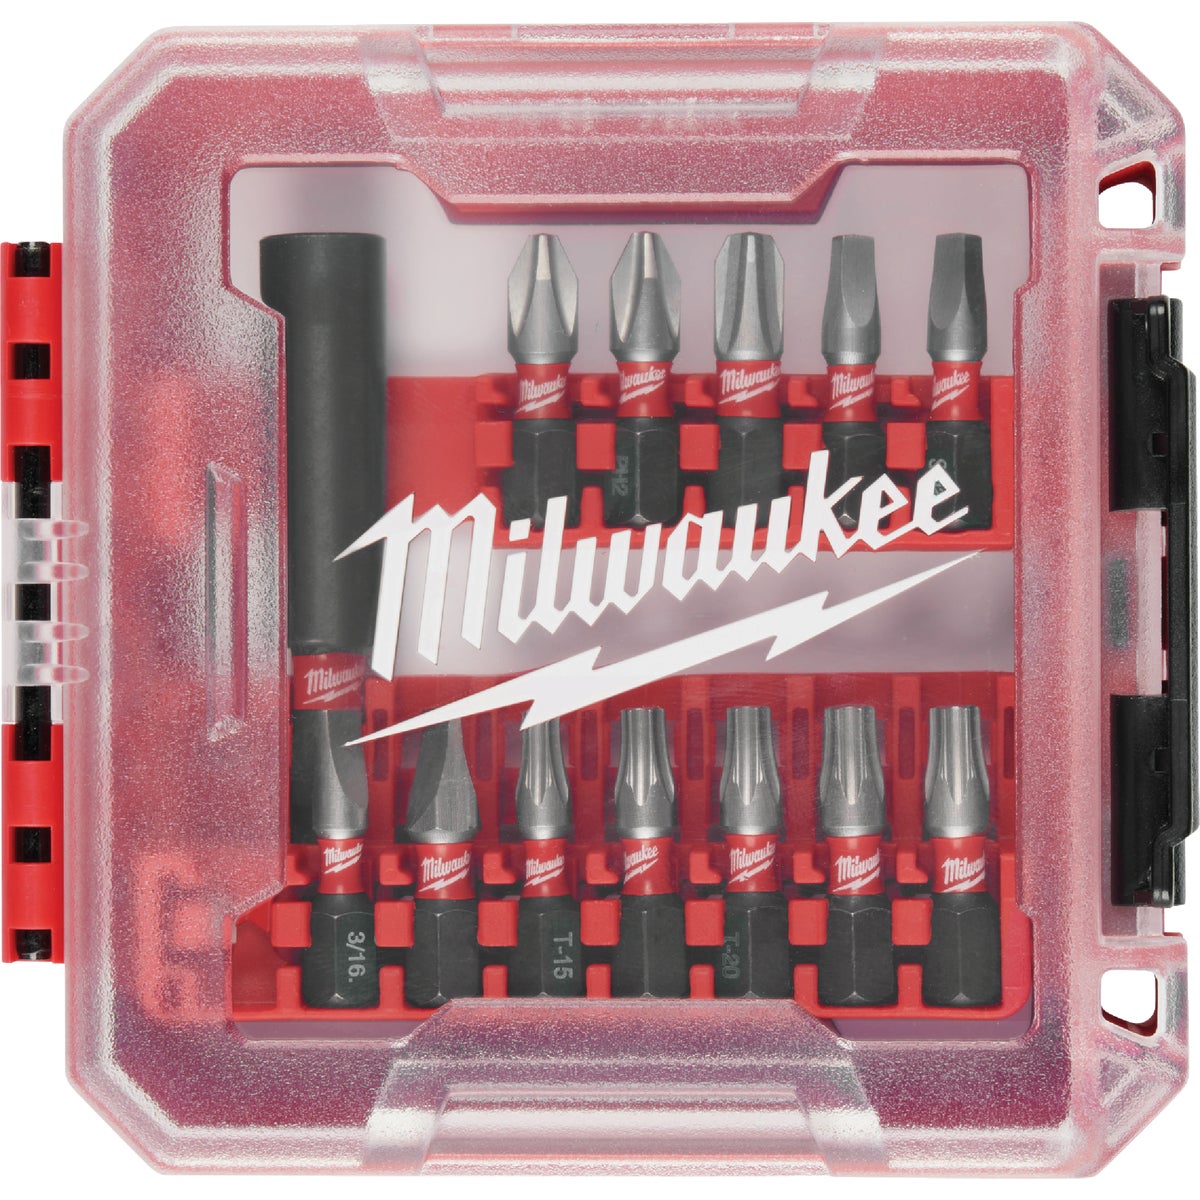 Item 300799, MILWAUKEE SHOCKWAVE Impact Duty 13PC Driver Bit Set is engineered to be the